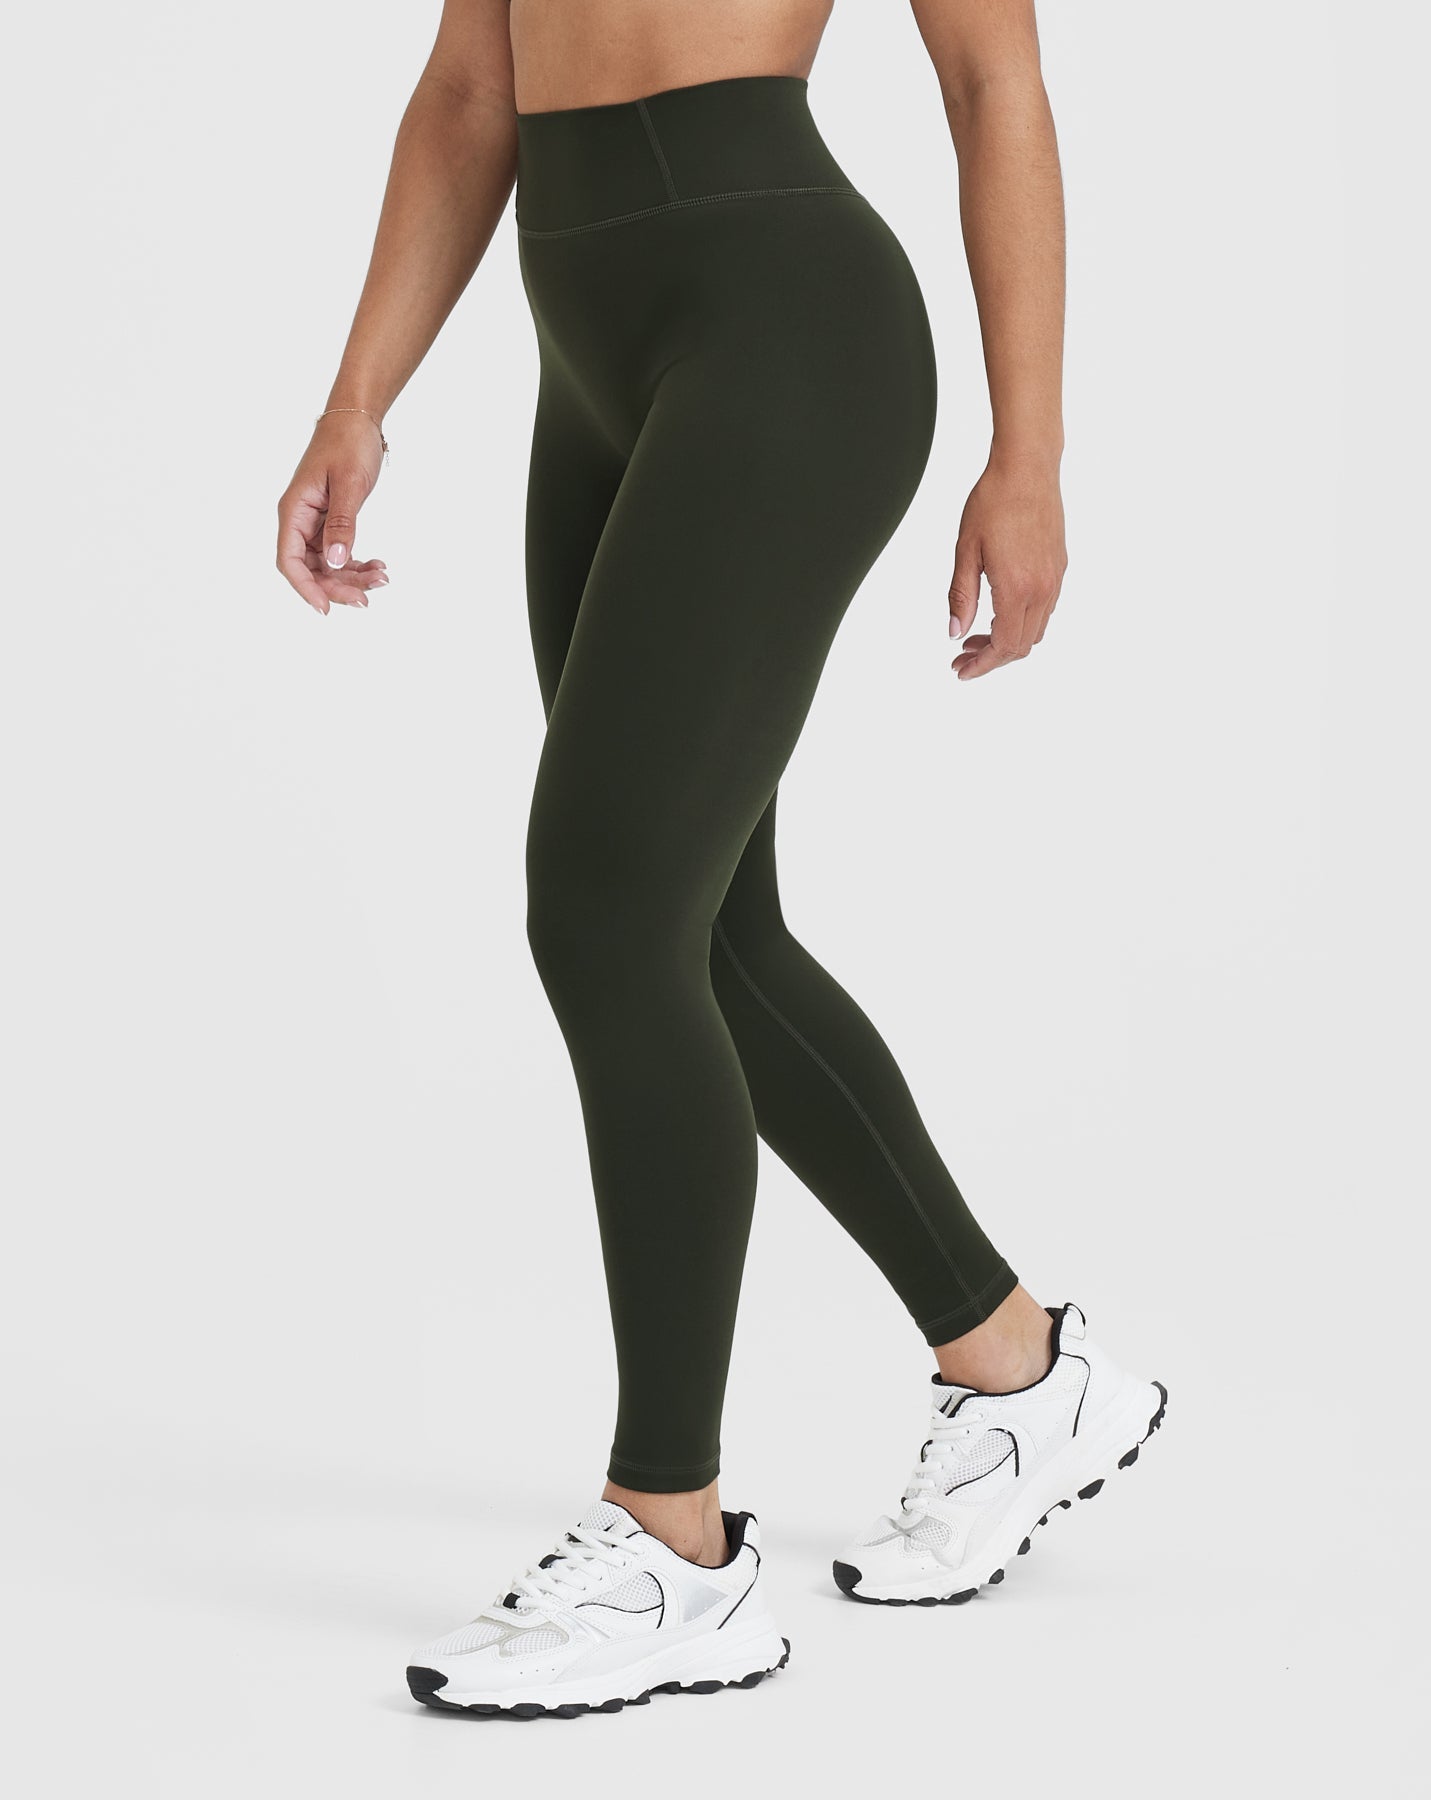 Buy Khaki/Green Active New & Improved High Rise Sports Sculpting